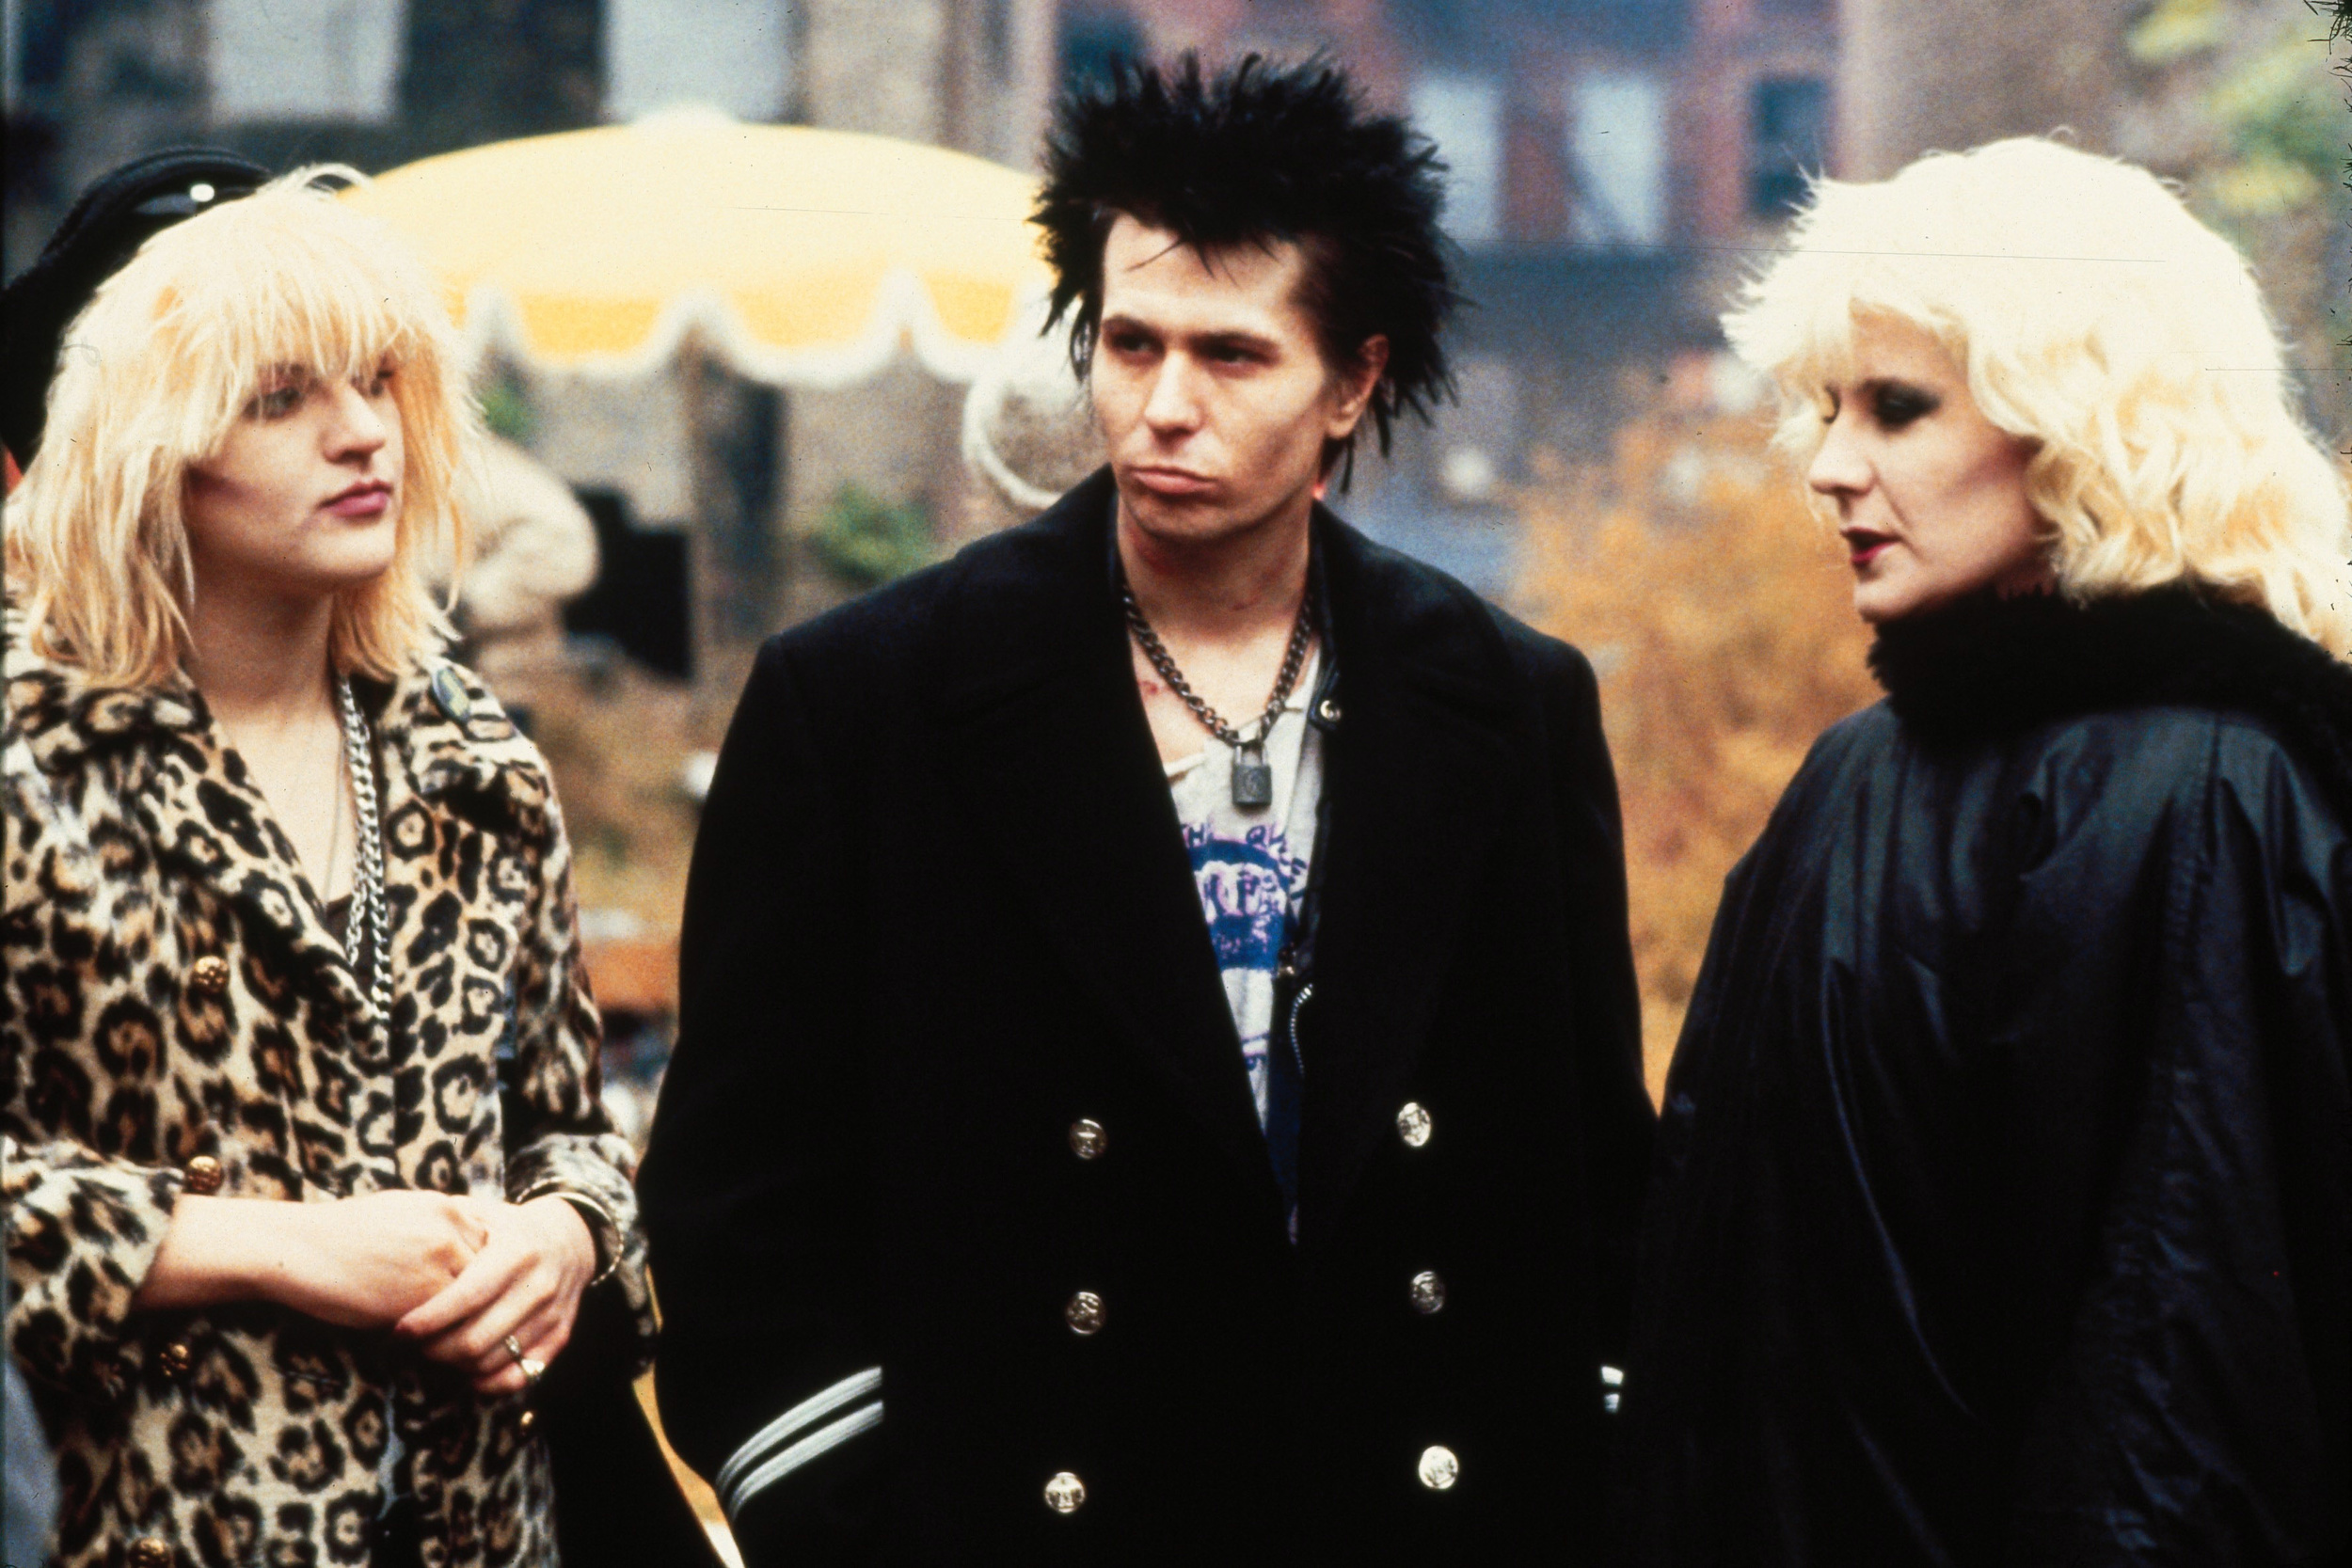 <p>Music plays a role in <em>Sid and Nancy</em> just like in "My Fair Lady,” but it’s a slightly different film. This movie tells the story of Sid Vicious and Nancy Spungen. Sid was a member of the Sex Pistols. He and Nancy had, shall we say, a complicated relationship. It’s not the cheeriest film.</p><p>You may also like: <a href='https://www.yardbarker.com/entertainment/articles/the_20_hardest_games_for_the_original_nes_console/s1__35984774'>The 20 hardest games for the original NES console</a></p>